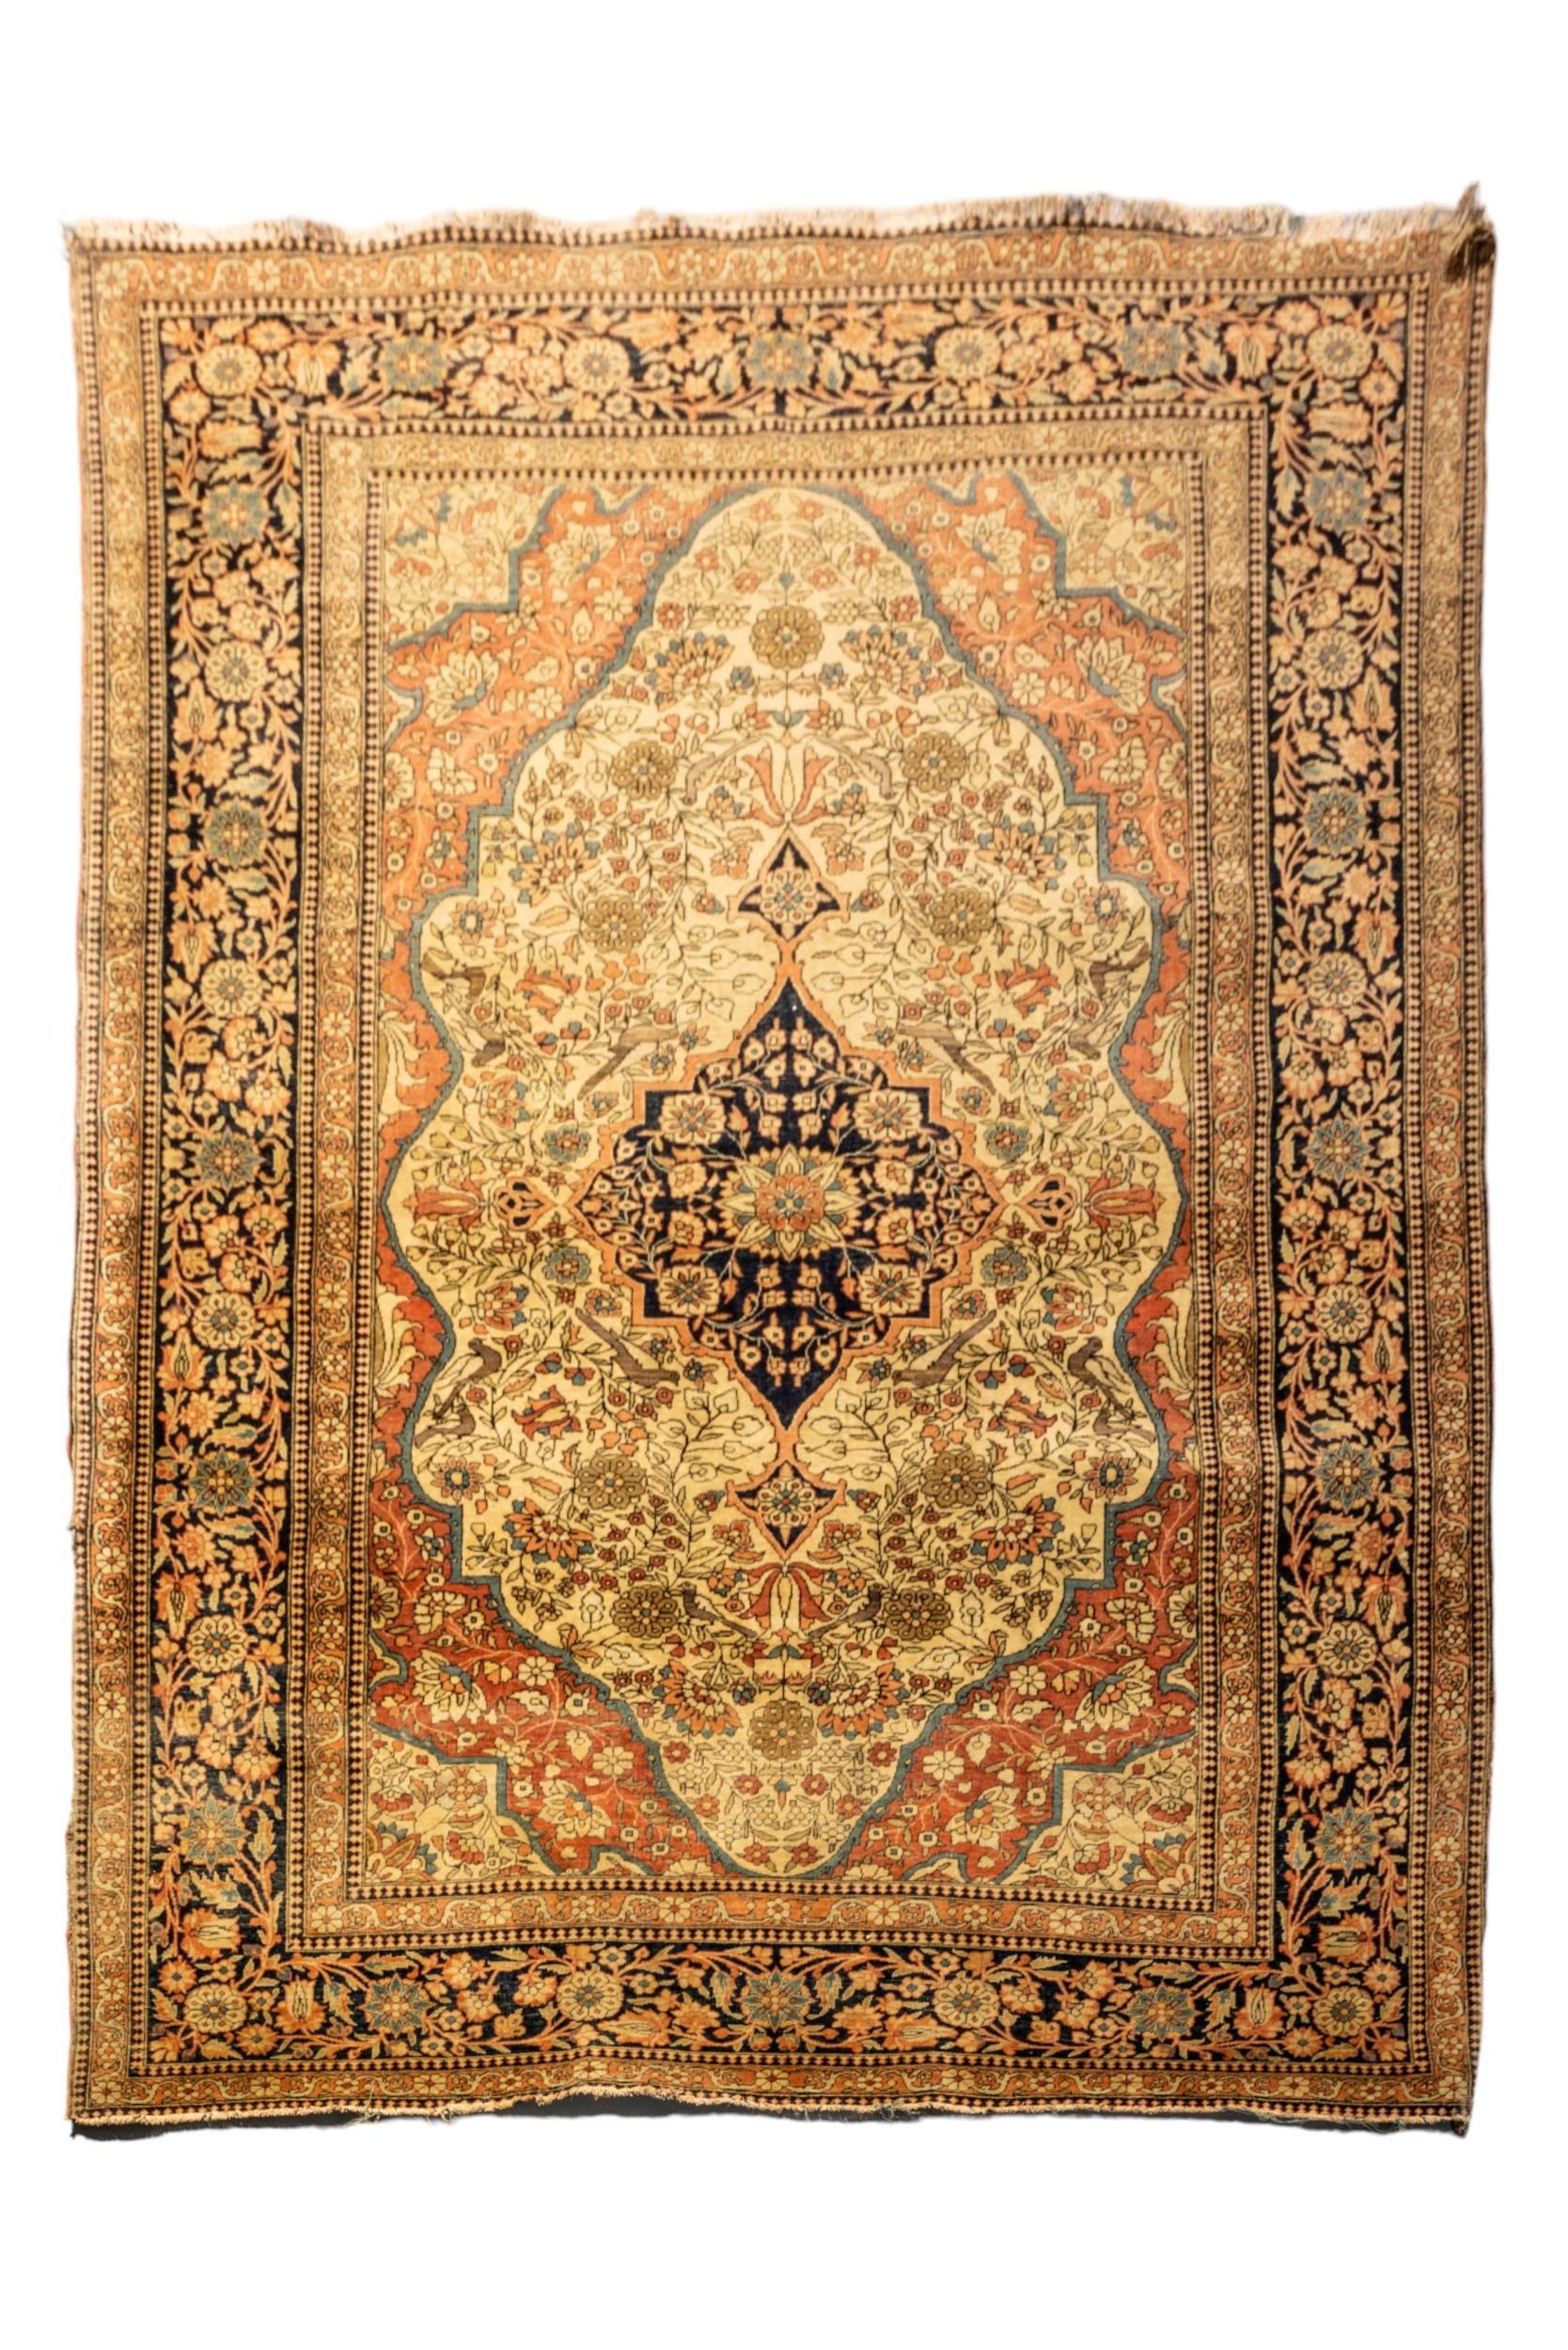 A HAND KNOTTED PERSIAN WOOL RUG, LATE 19TH / EARLY 20TH CENTURY, probably Kashan, slightly faded and